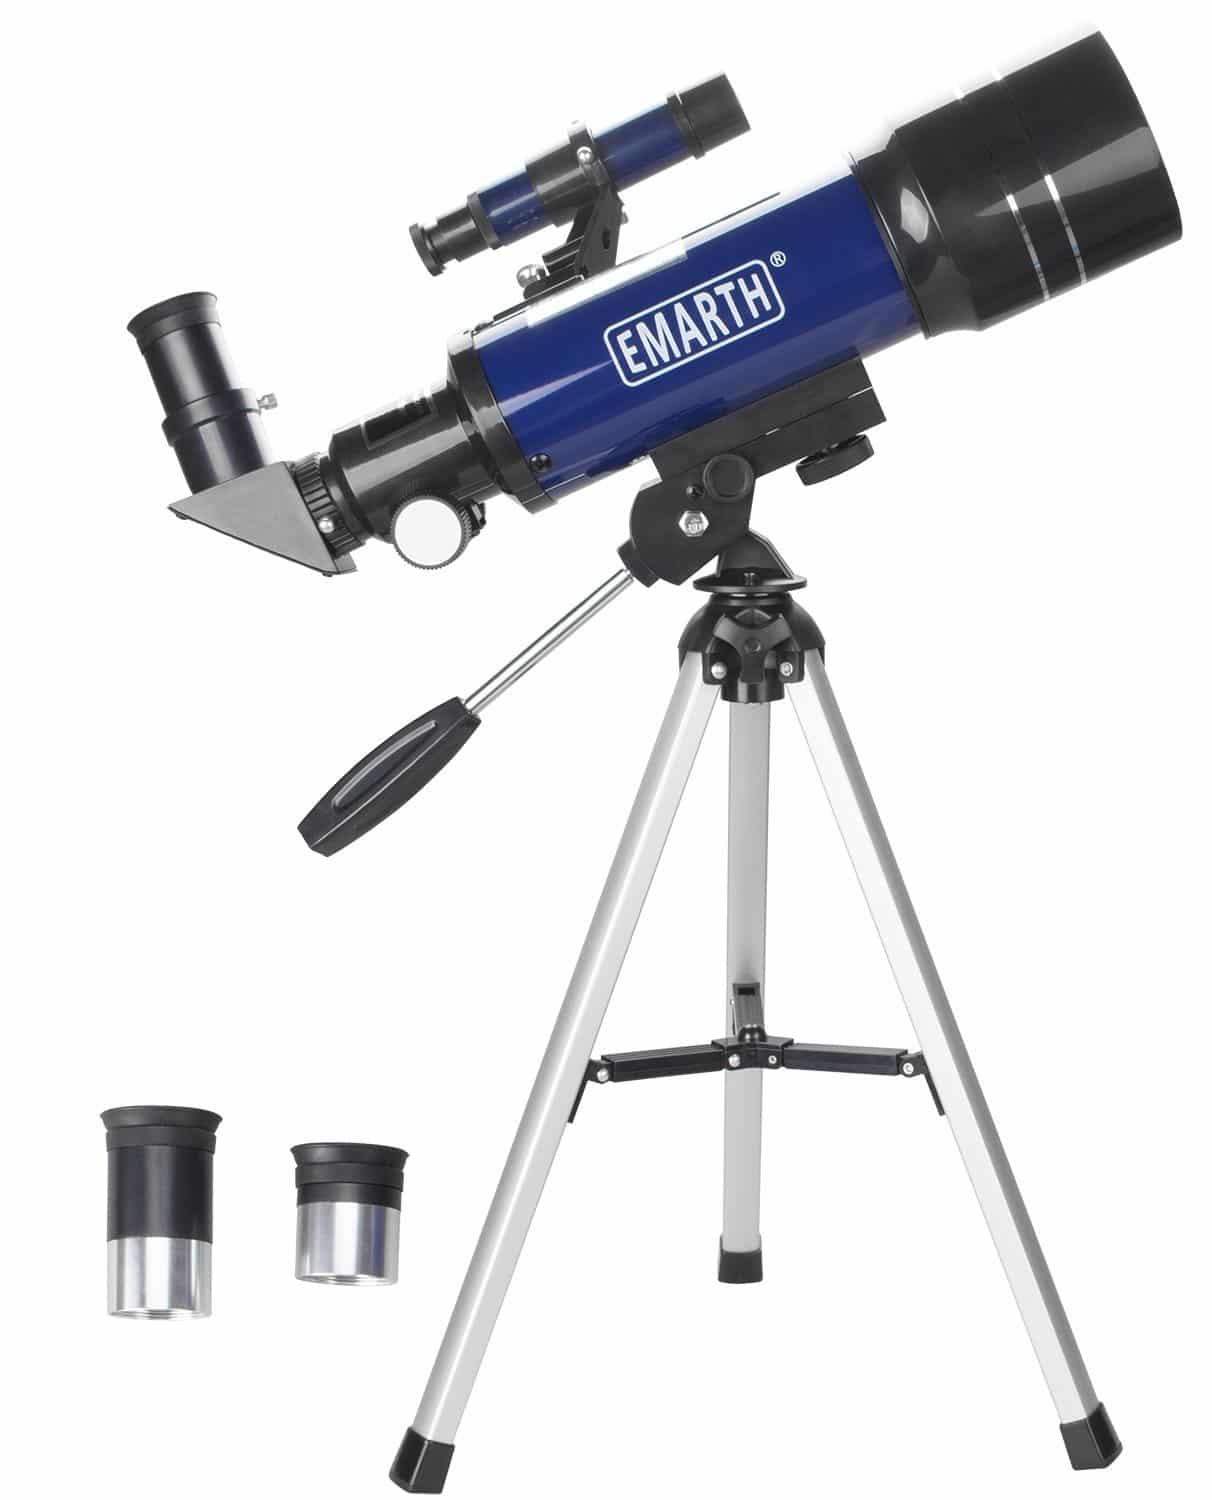 DEAL ALERT: 70mm Astronomical Refracter Telescope with Tripod & Finder Scope – 66%